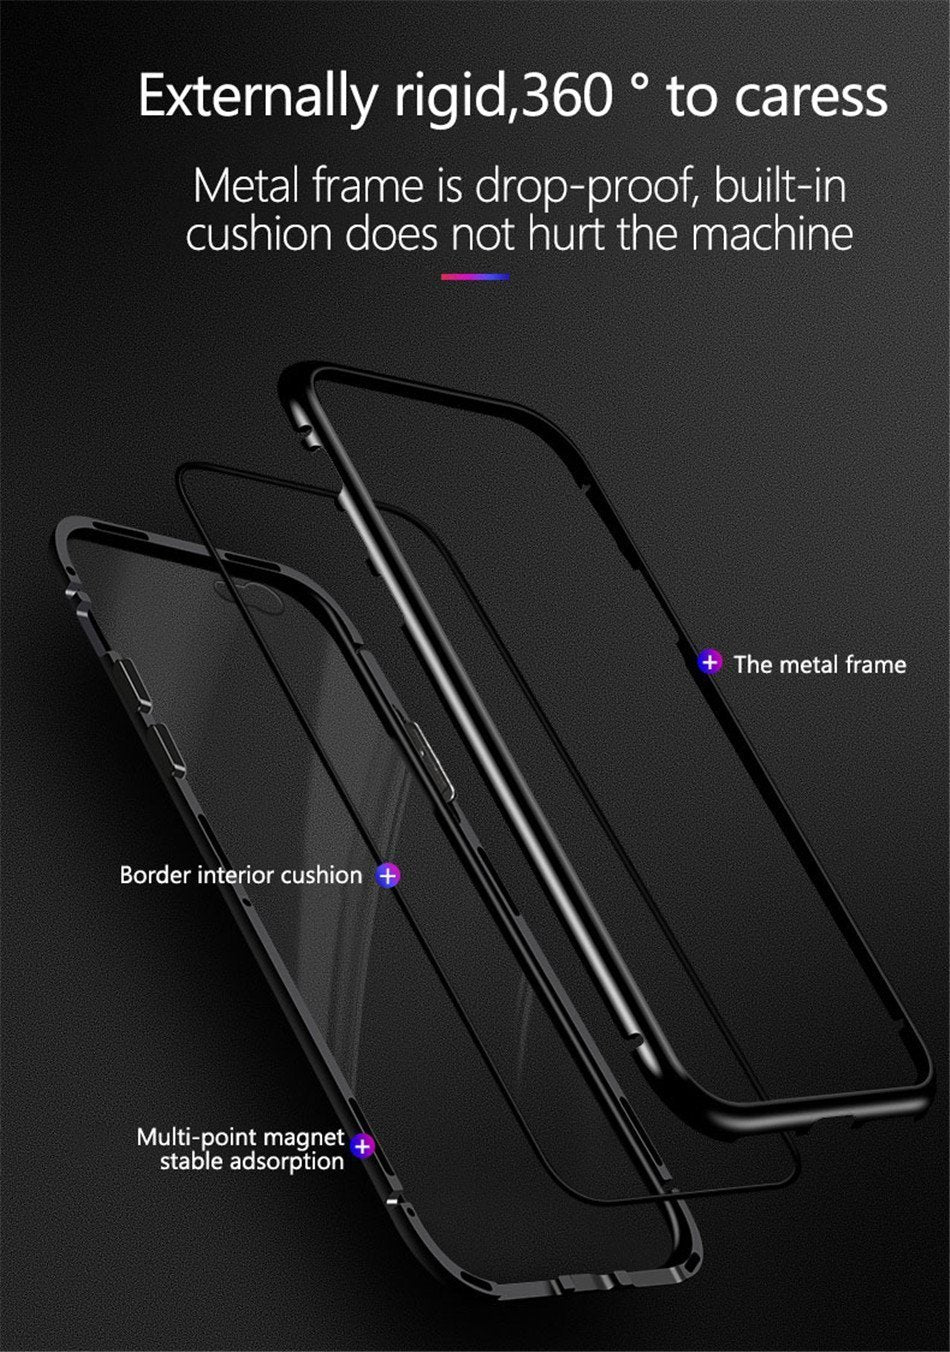 Magnetic iPhone and Samsung Case